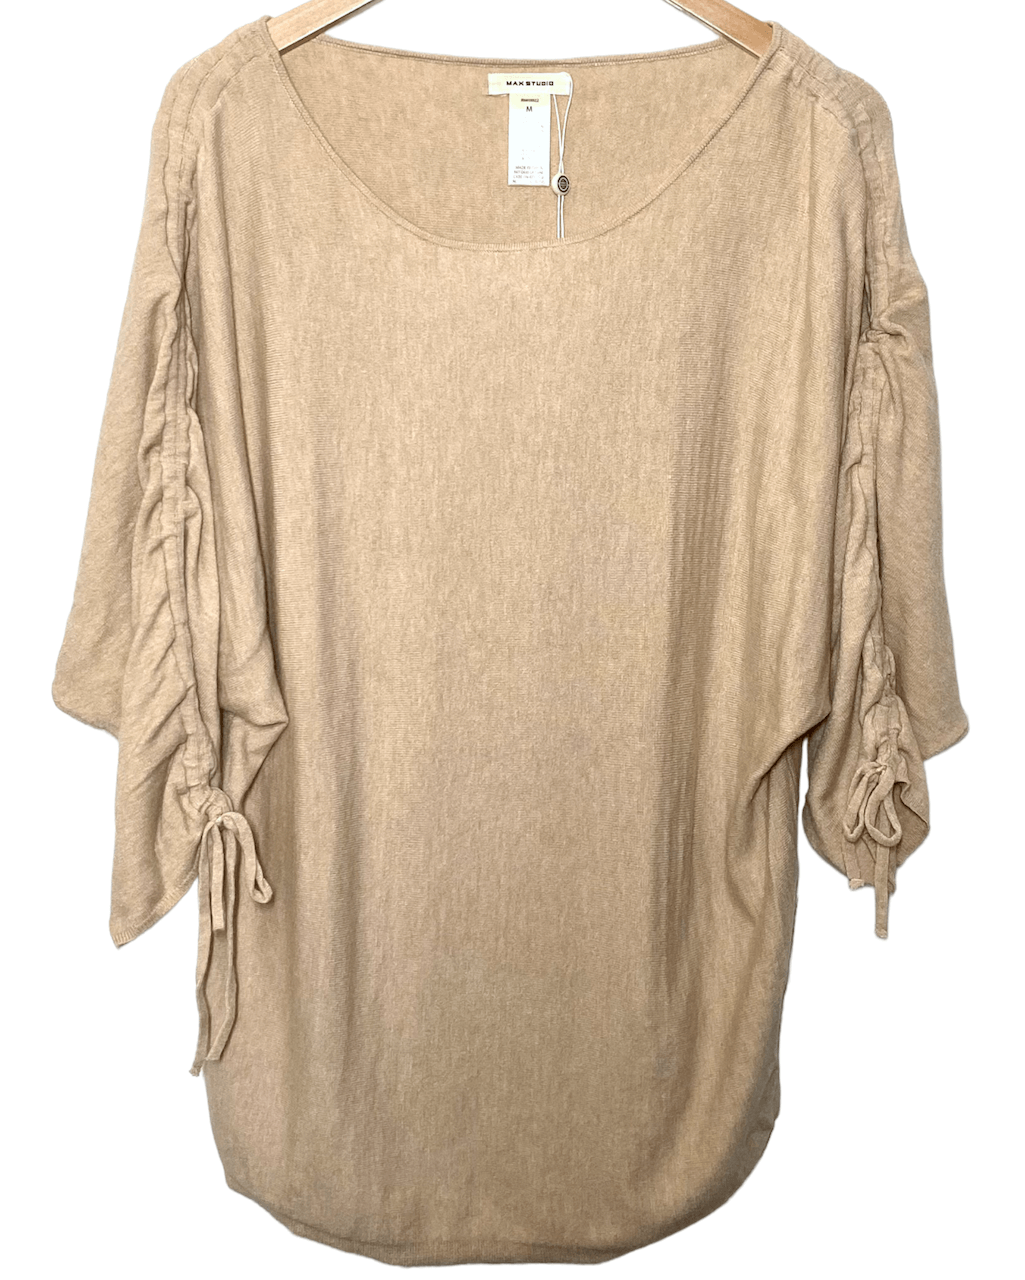 Soft Autumn MAX STUDIO wheat ruched sleeve sweater